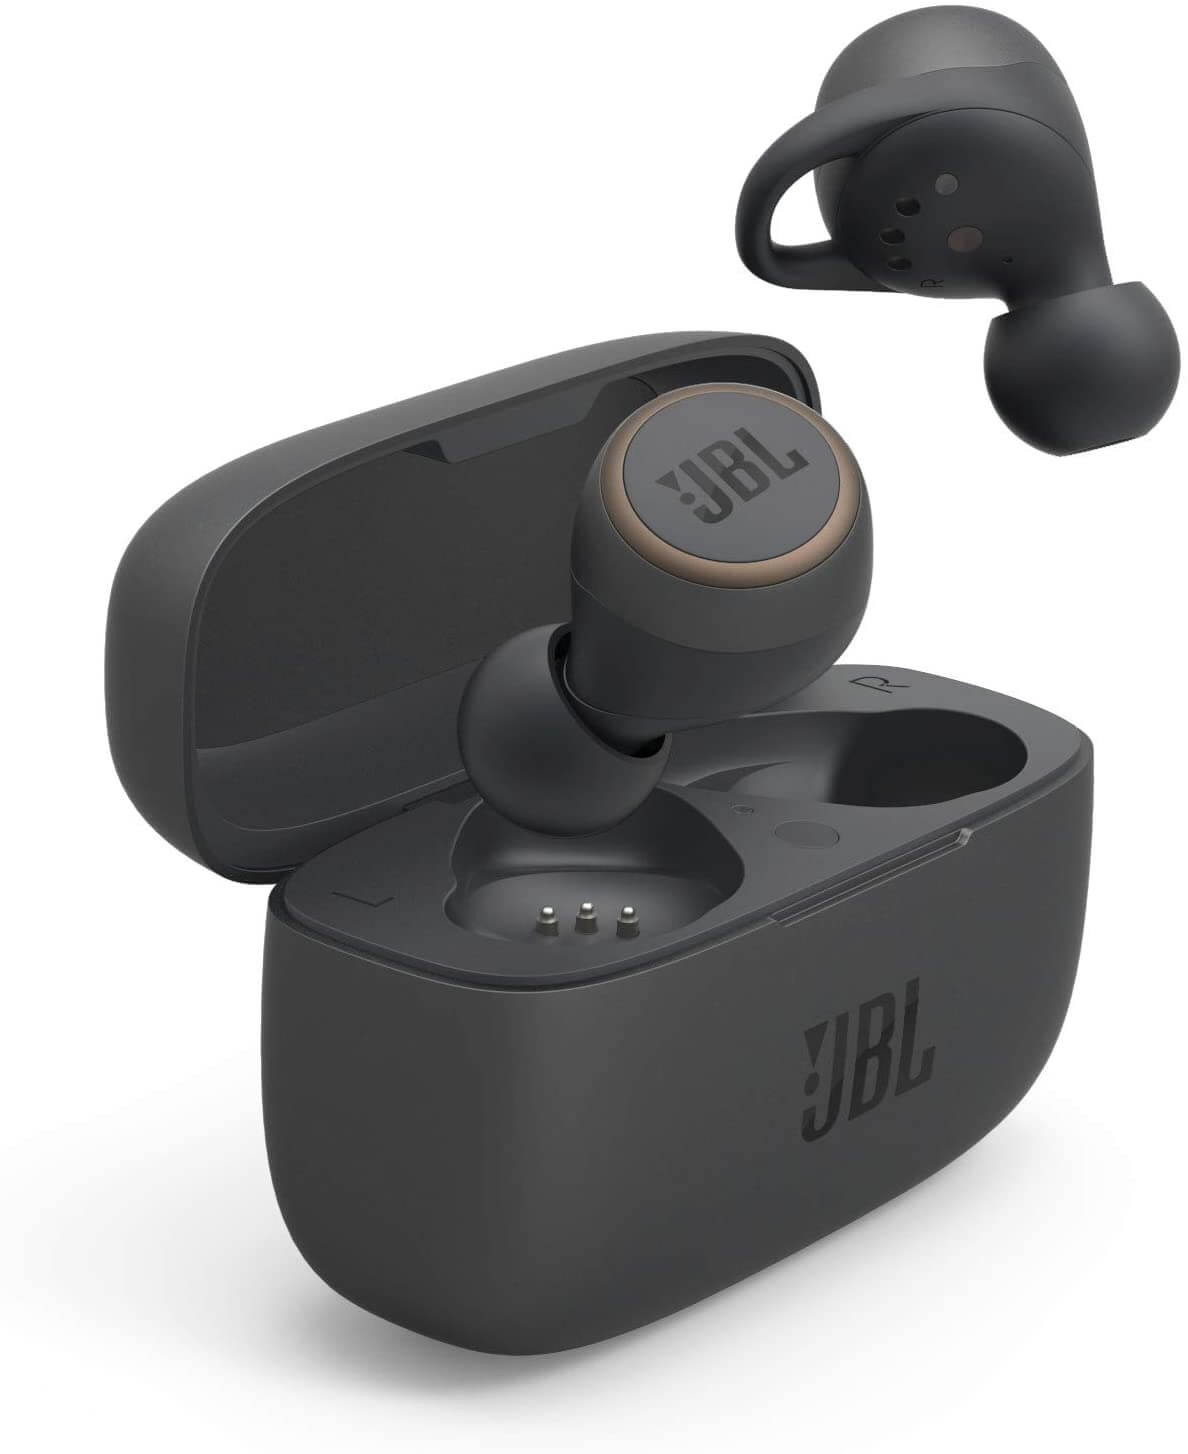 Top 5 Wireless Earbuds 2021 Based On Price, Quality and Battery Life